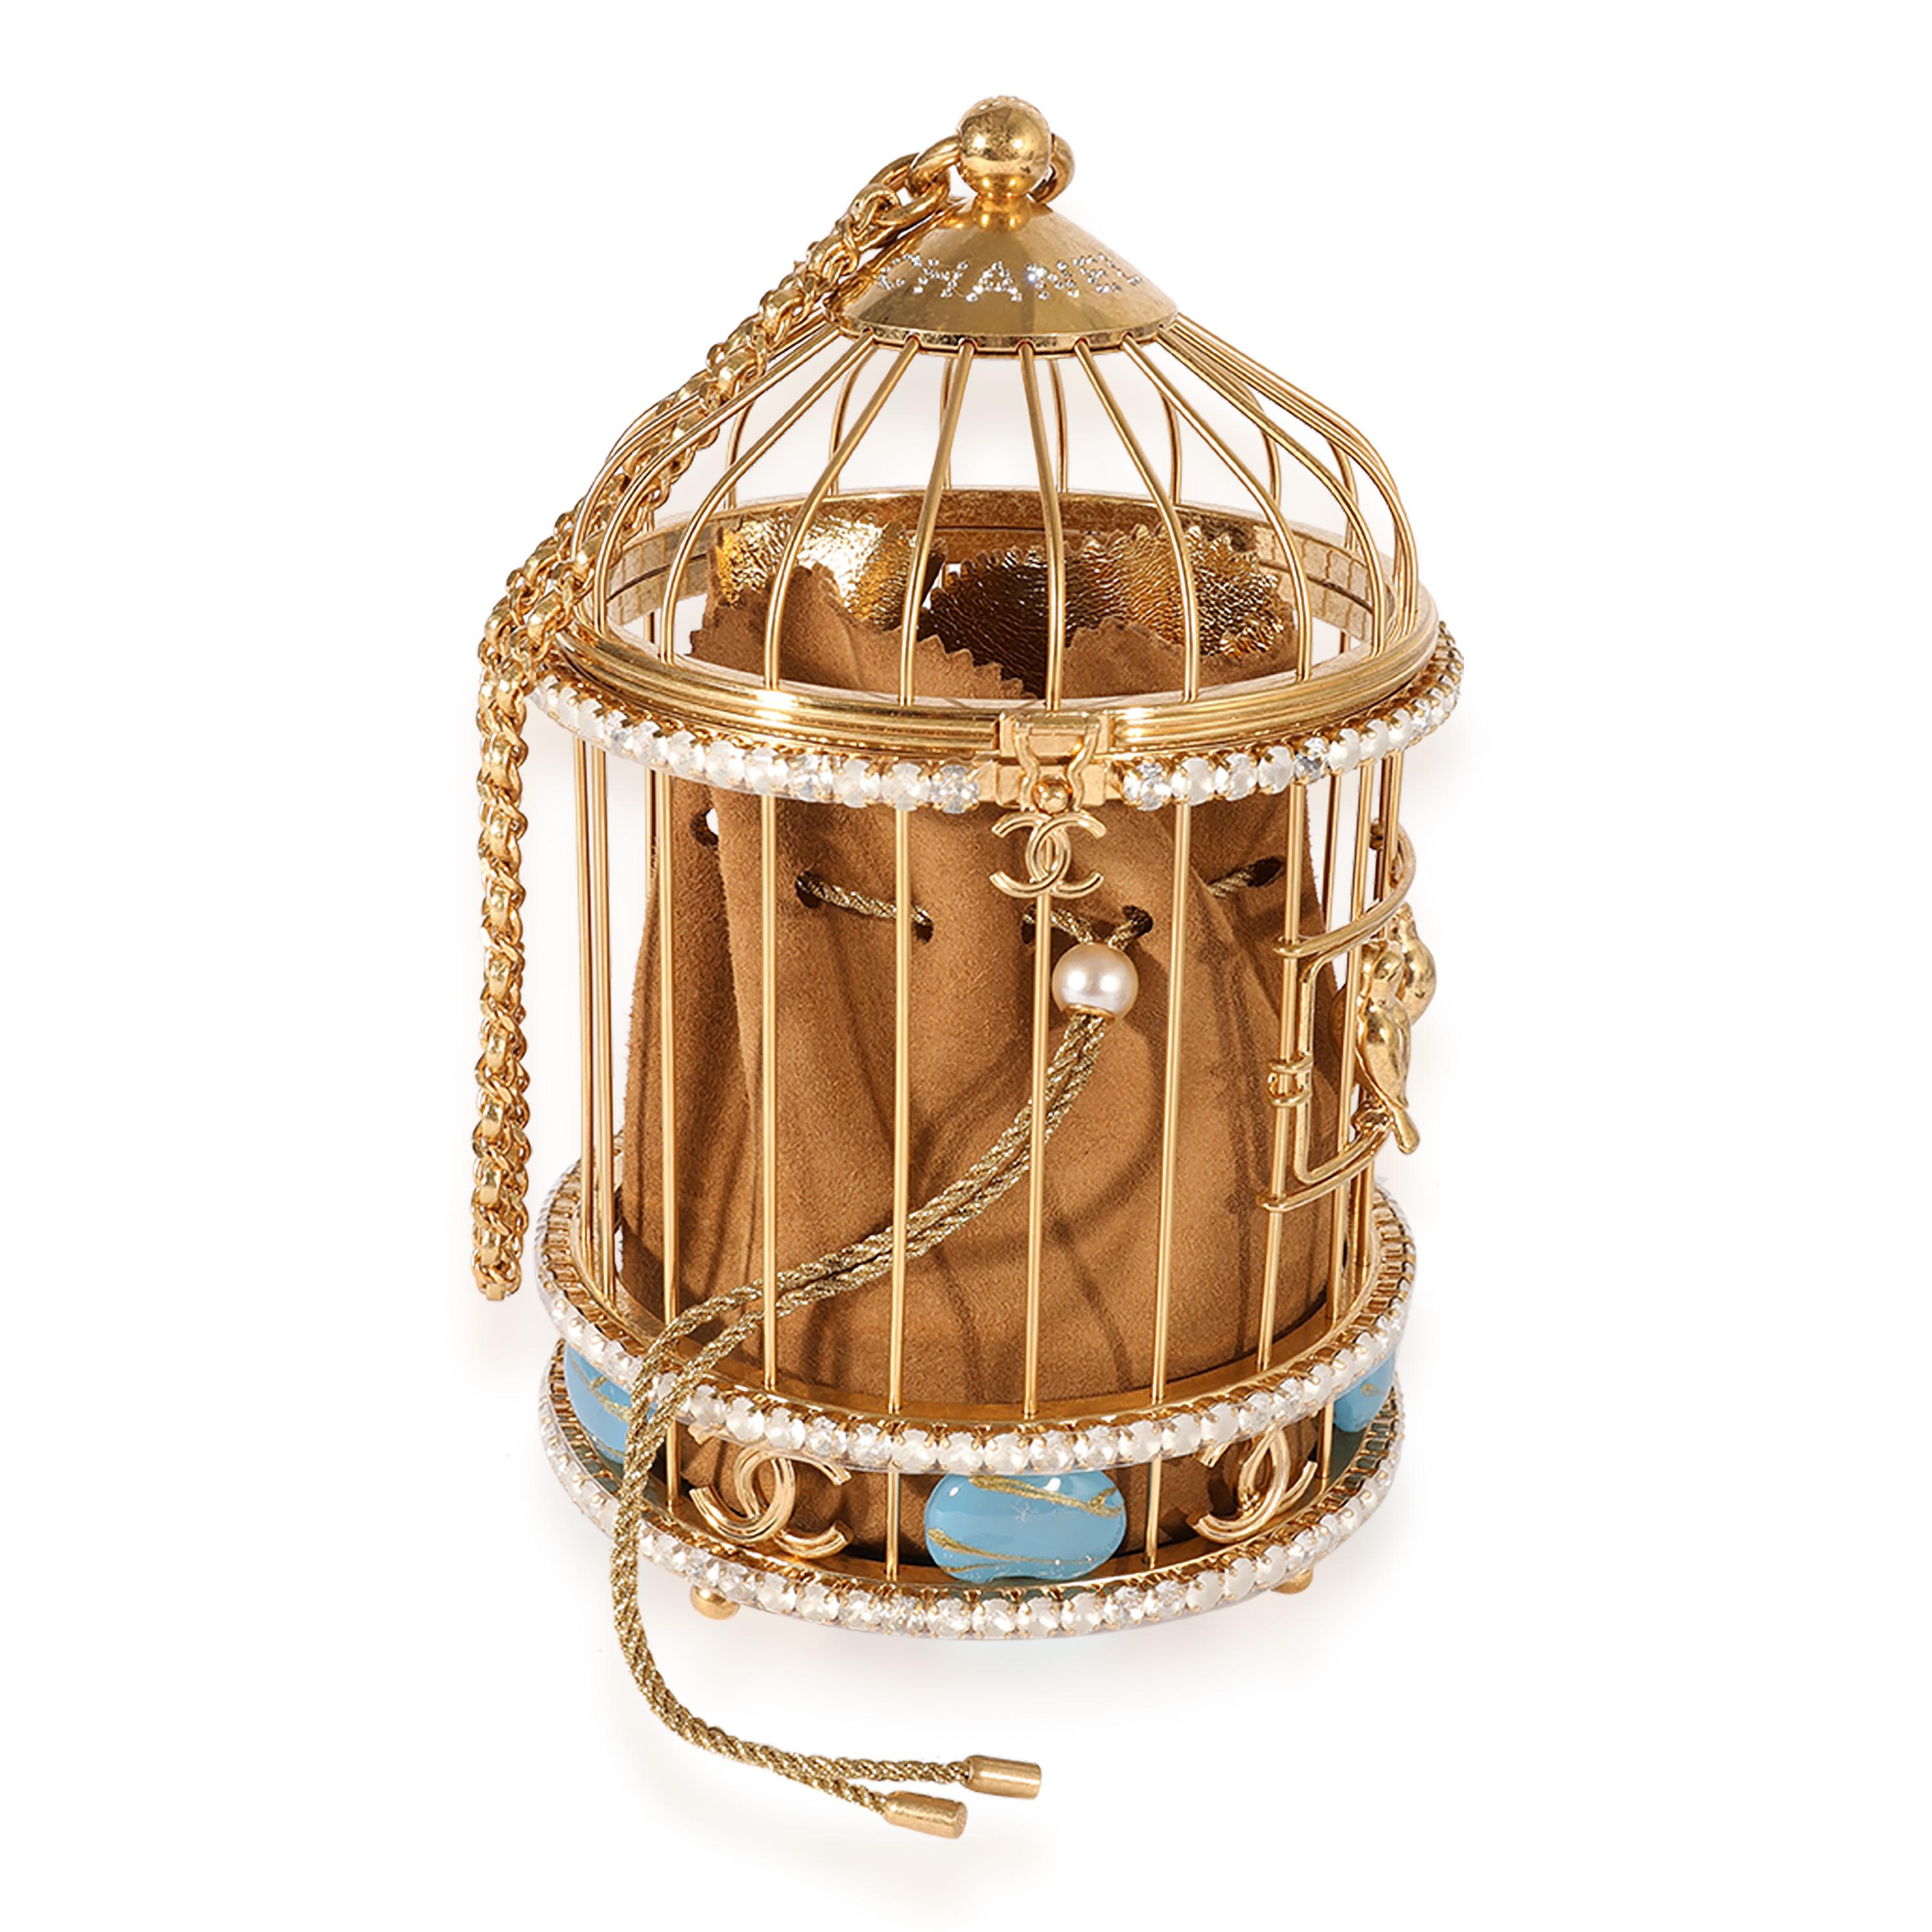 Listing Title: Chanel Runway Gold-Tone Metal & Crystal Bird Cage  Minaudière
SKU: 123609
MSRP: 20500.00
Condition: Pre-owned 
Handbag Condition: Mint
Condition Comments: Mint Condition. Plastic on some hardware. No visible signs of wear. Final